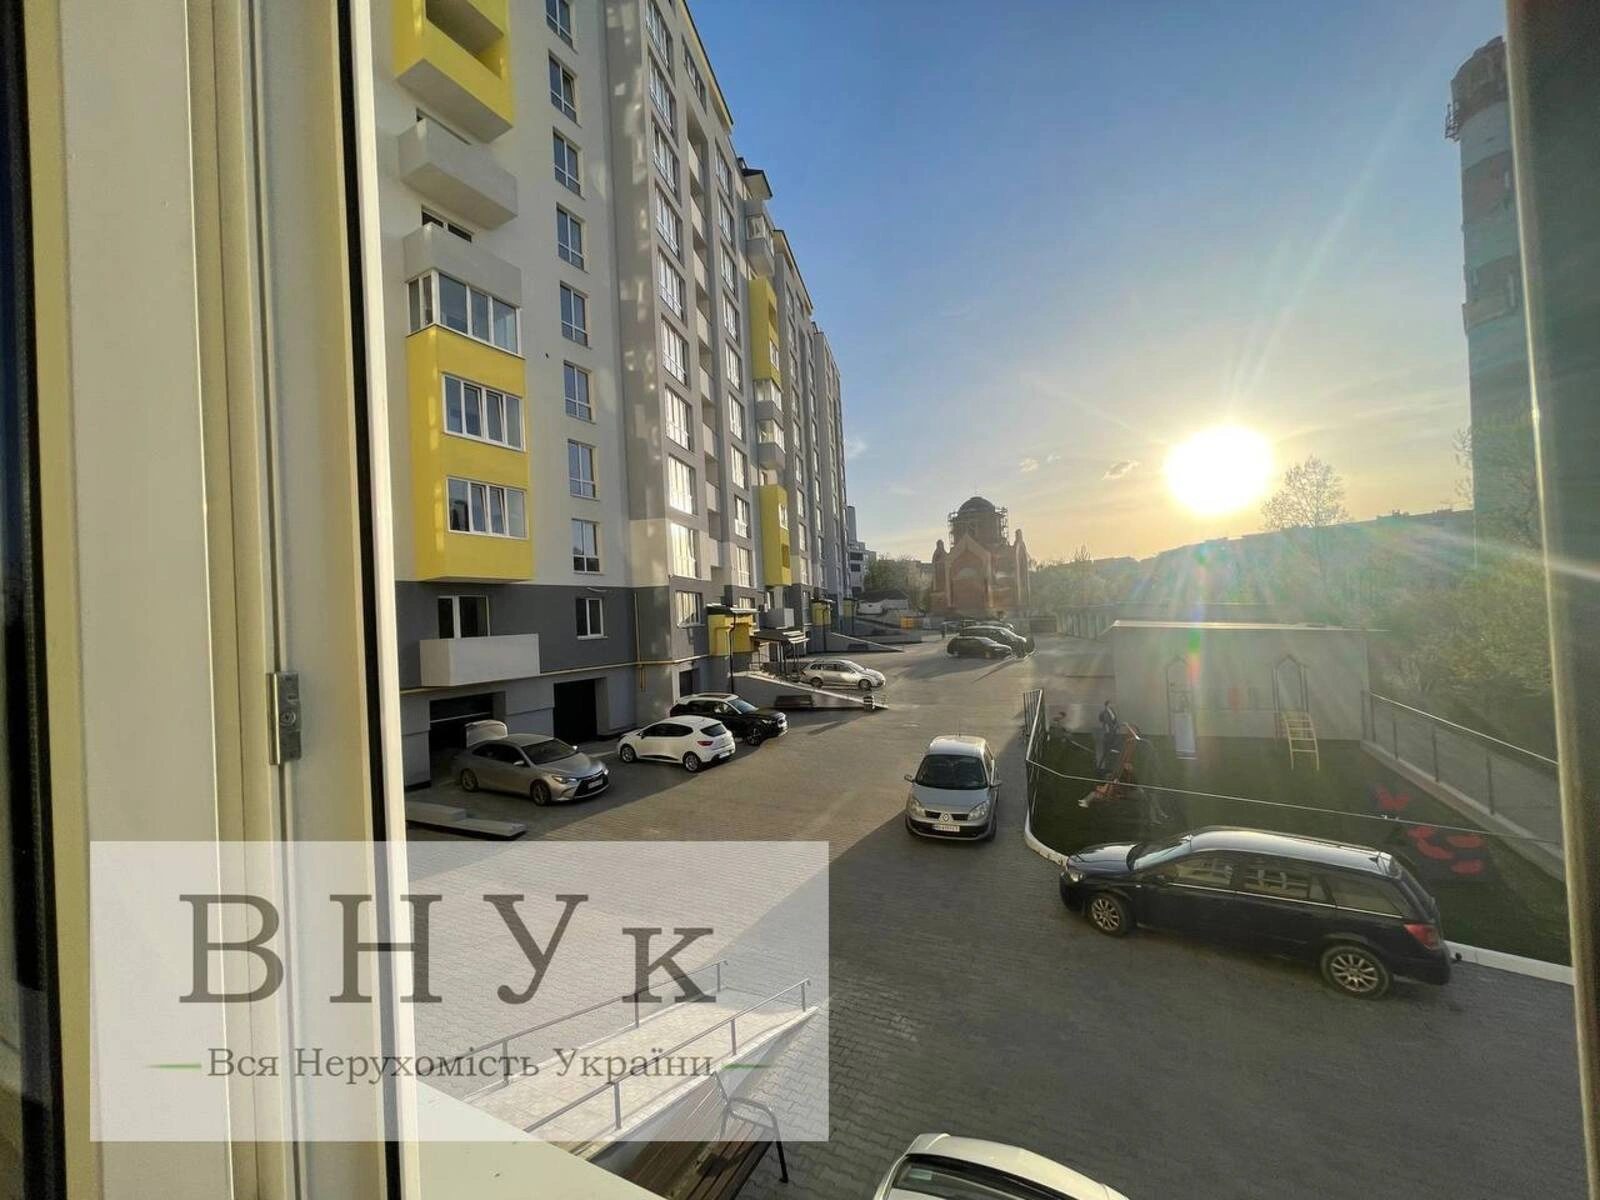 Apartments for sale. 3 rooms, 91 m², 1st floor/11 floors. Budnoho S. , Ternopil. 